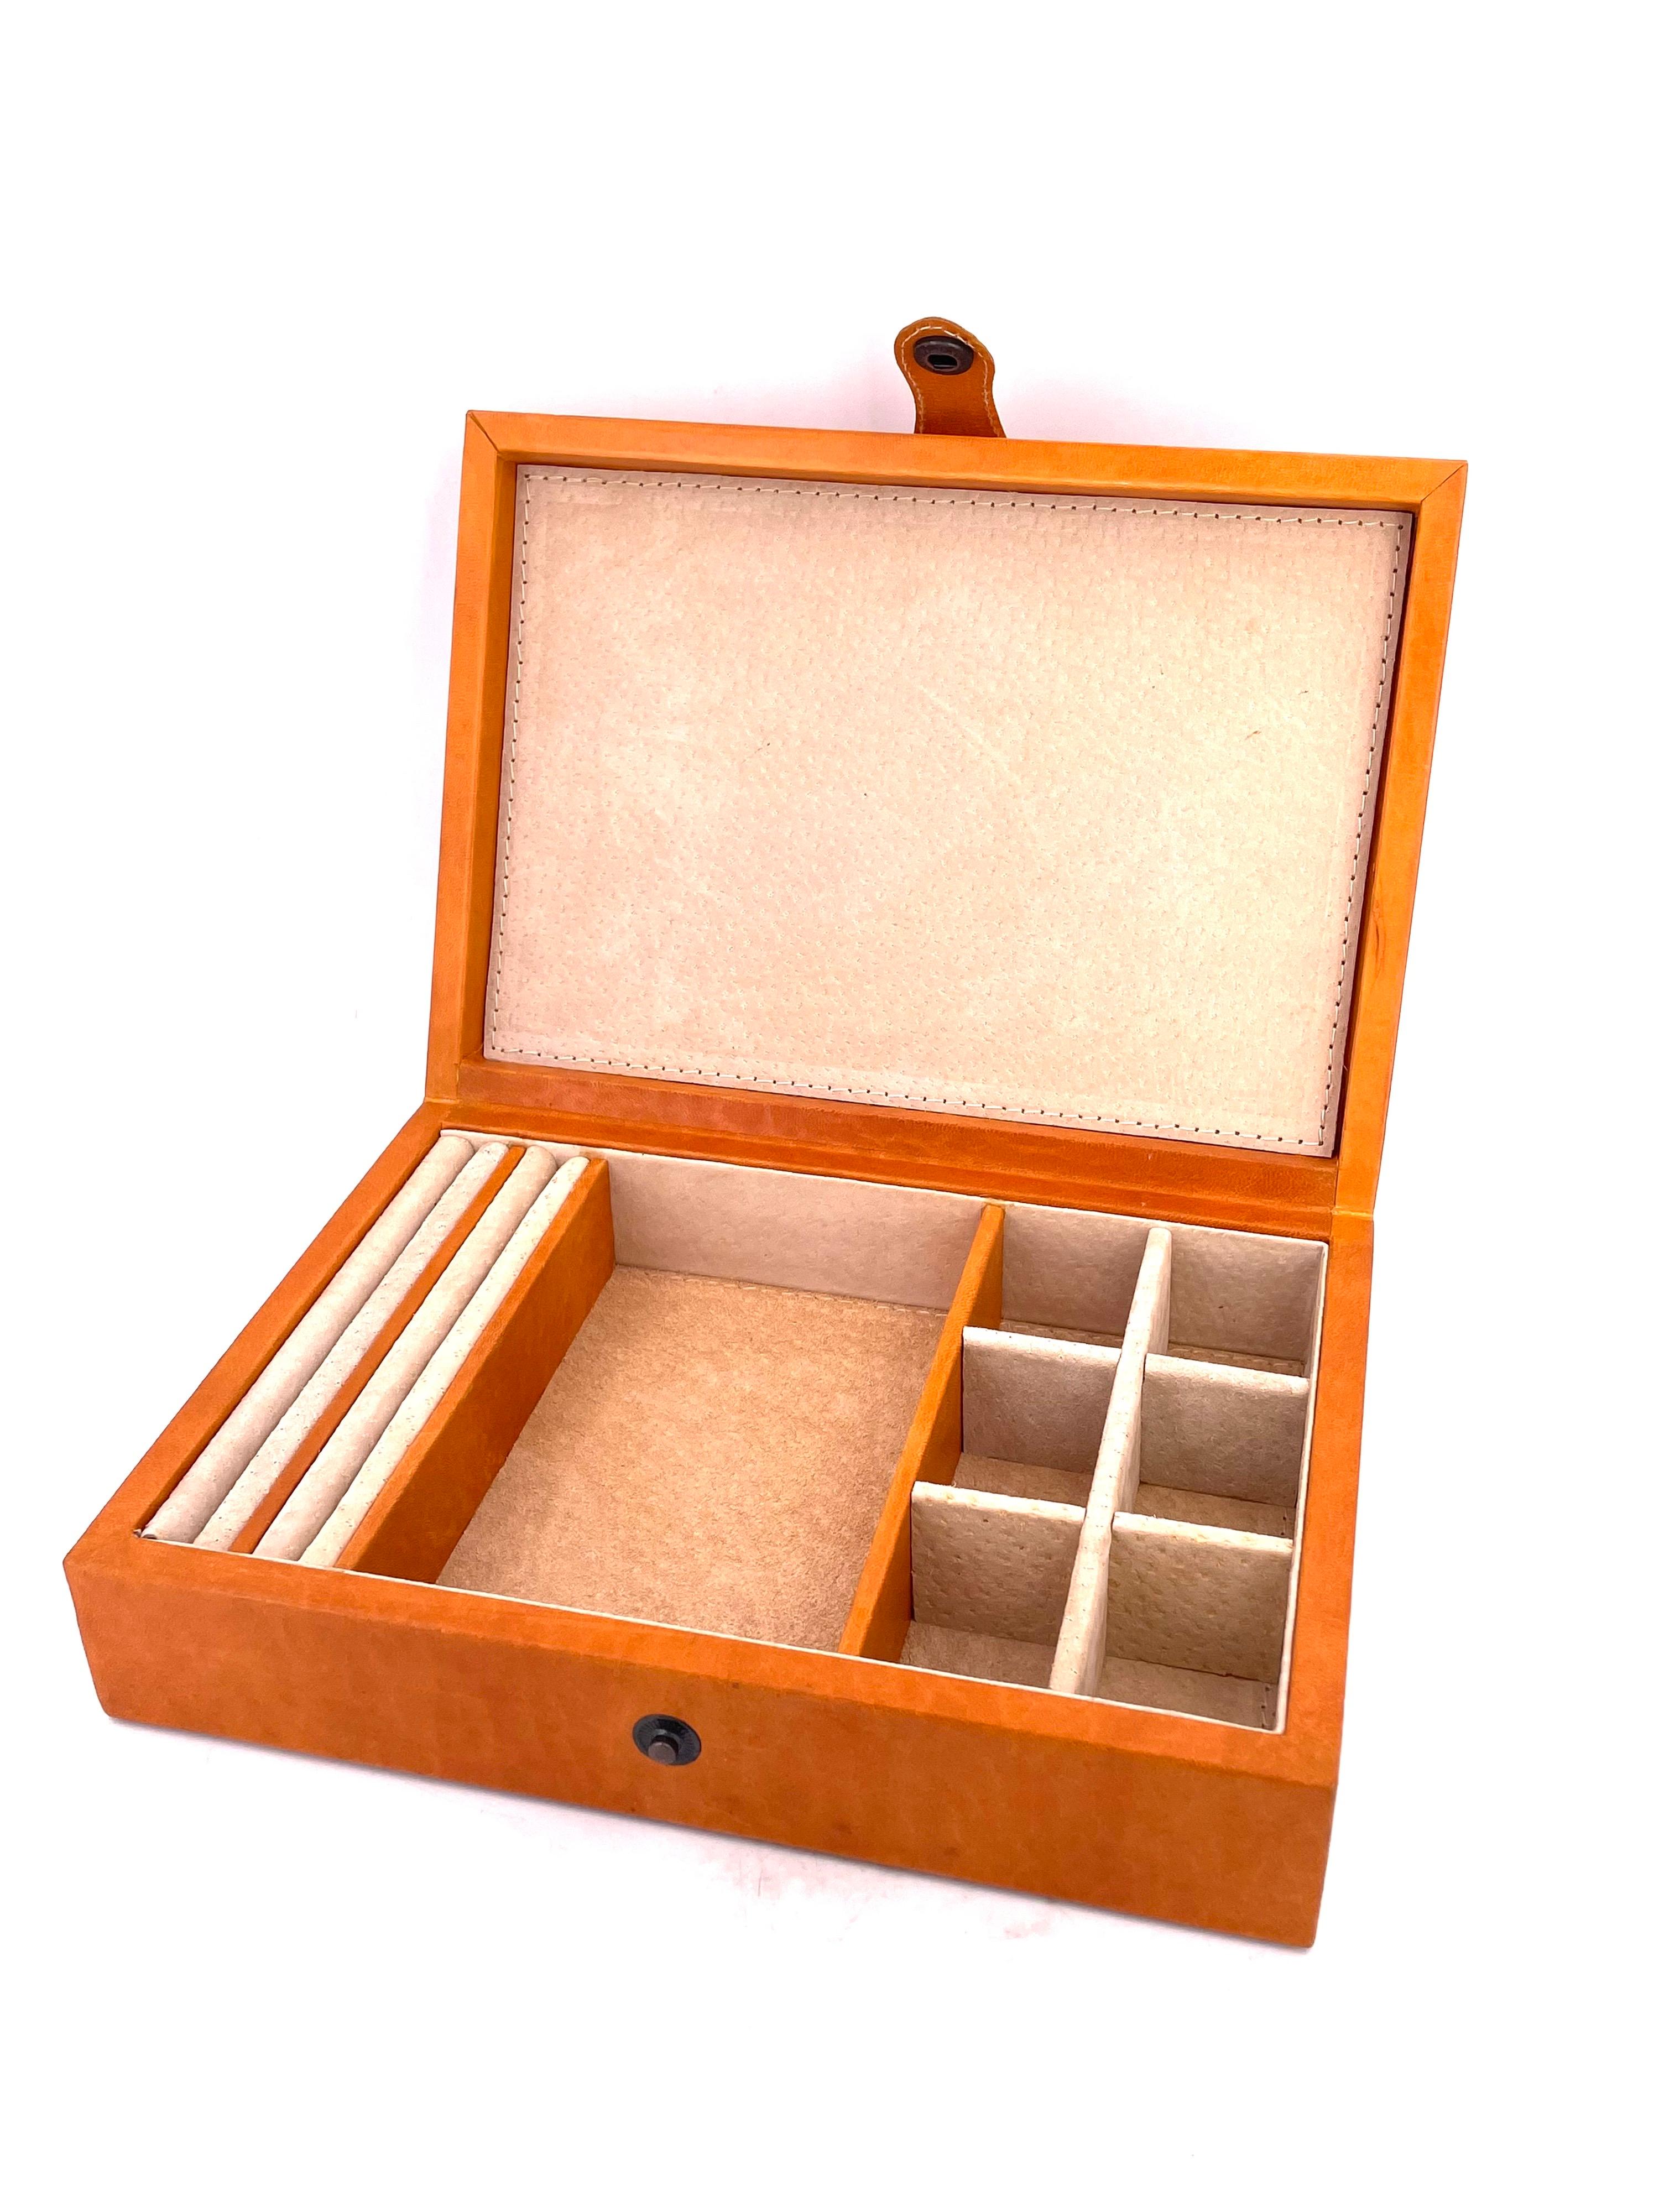 20th Century Elegant Set of 3 Leather Handstitched Jewelry Boxes